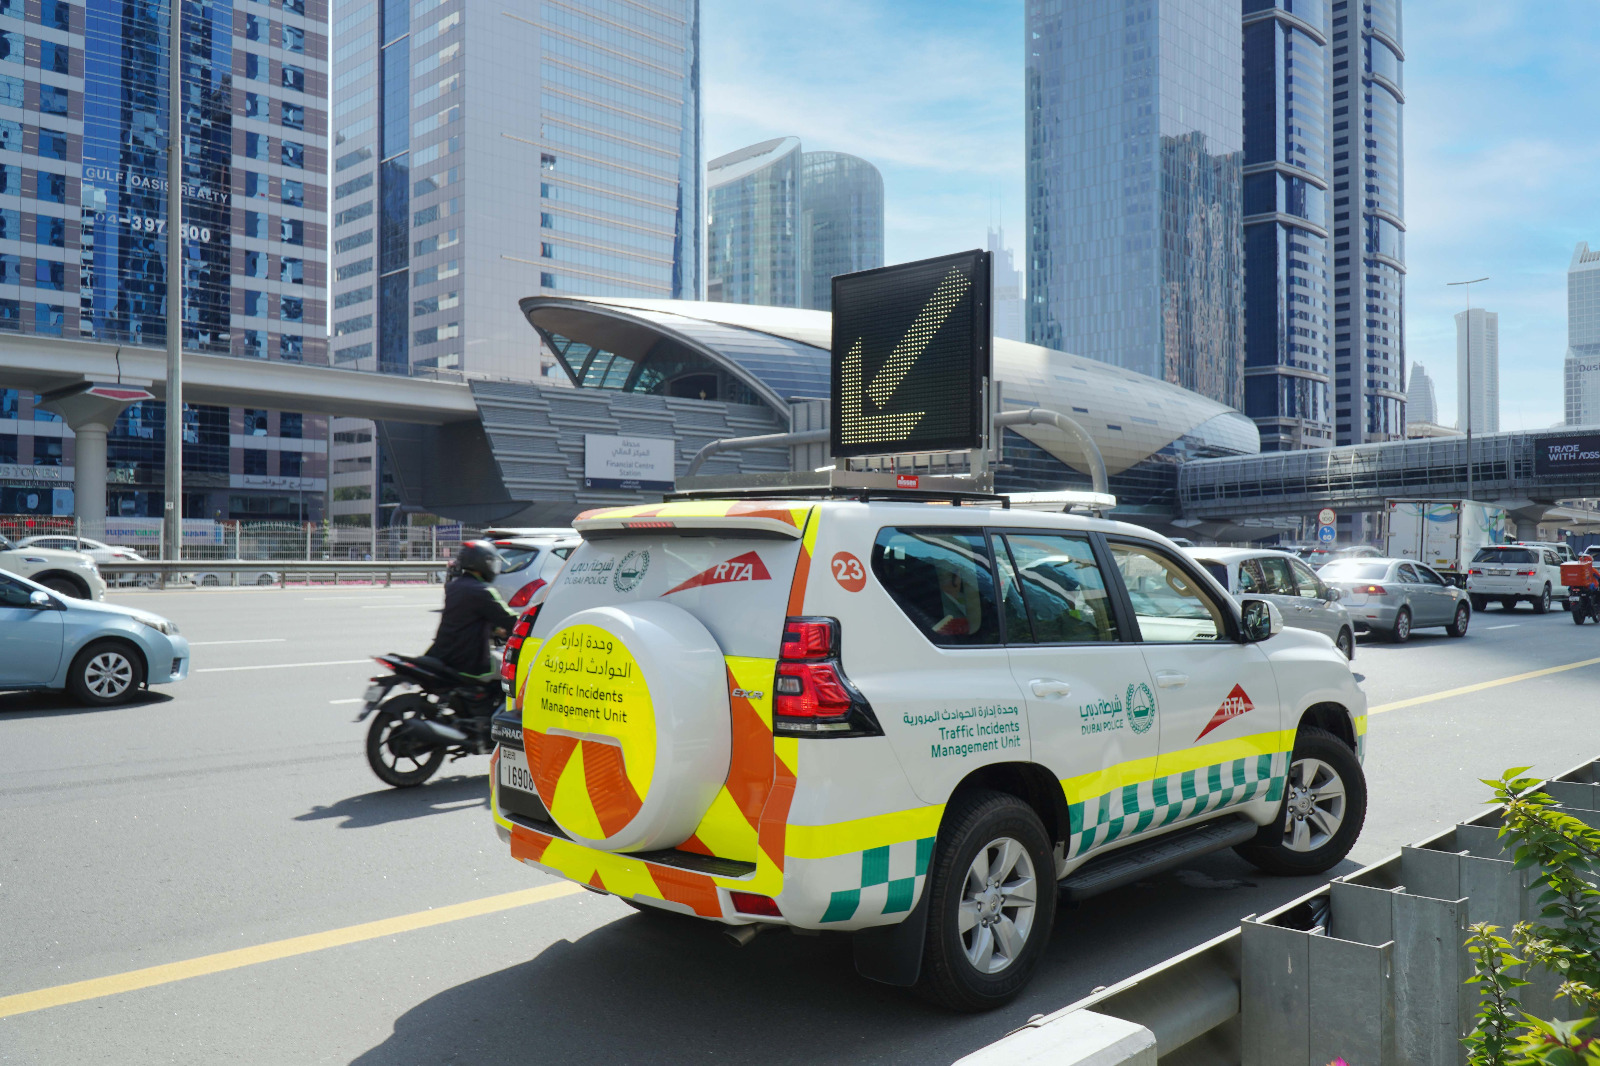 Dubai Roads launches the second phase of the accident management project, in coordination with Dubai Police.